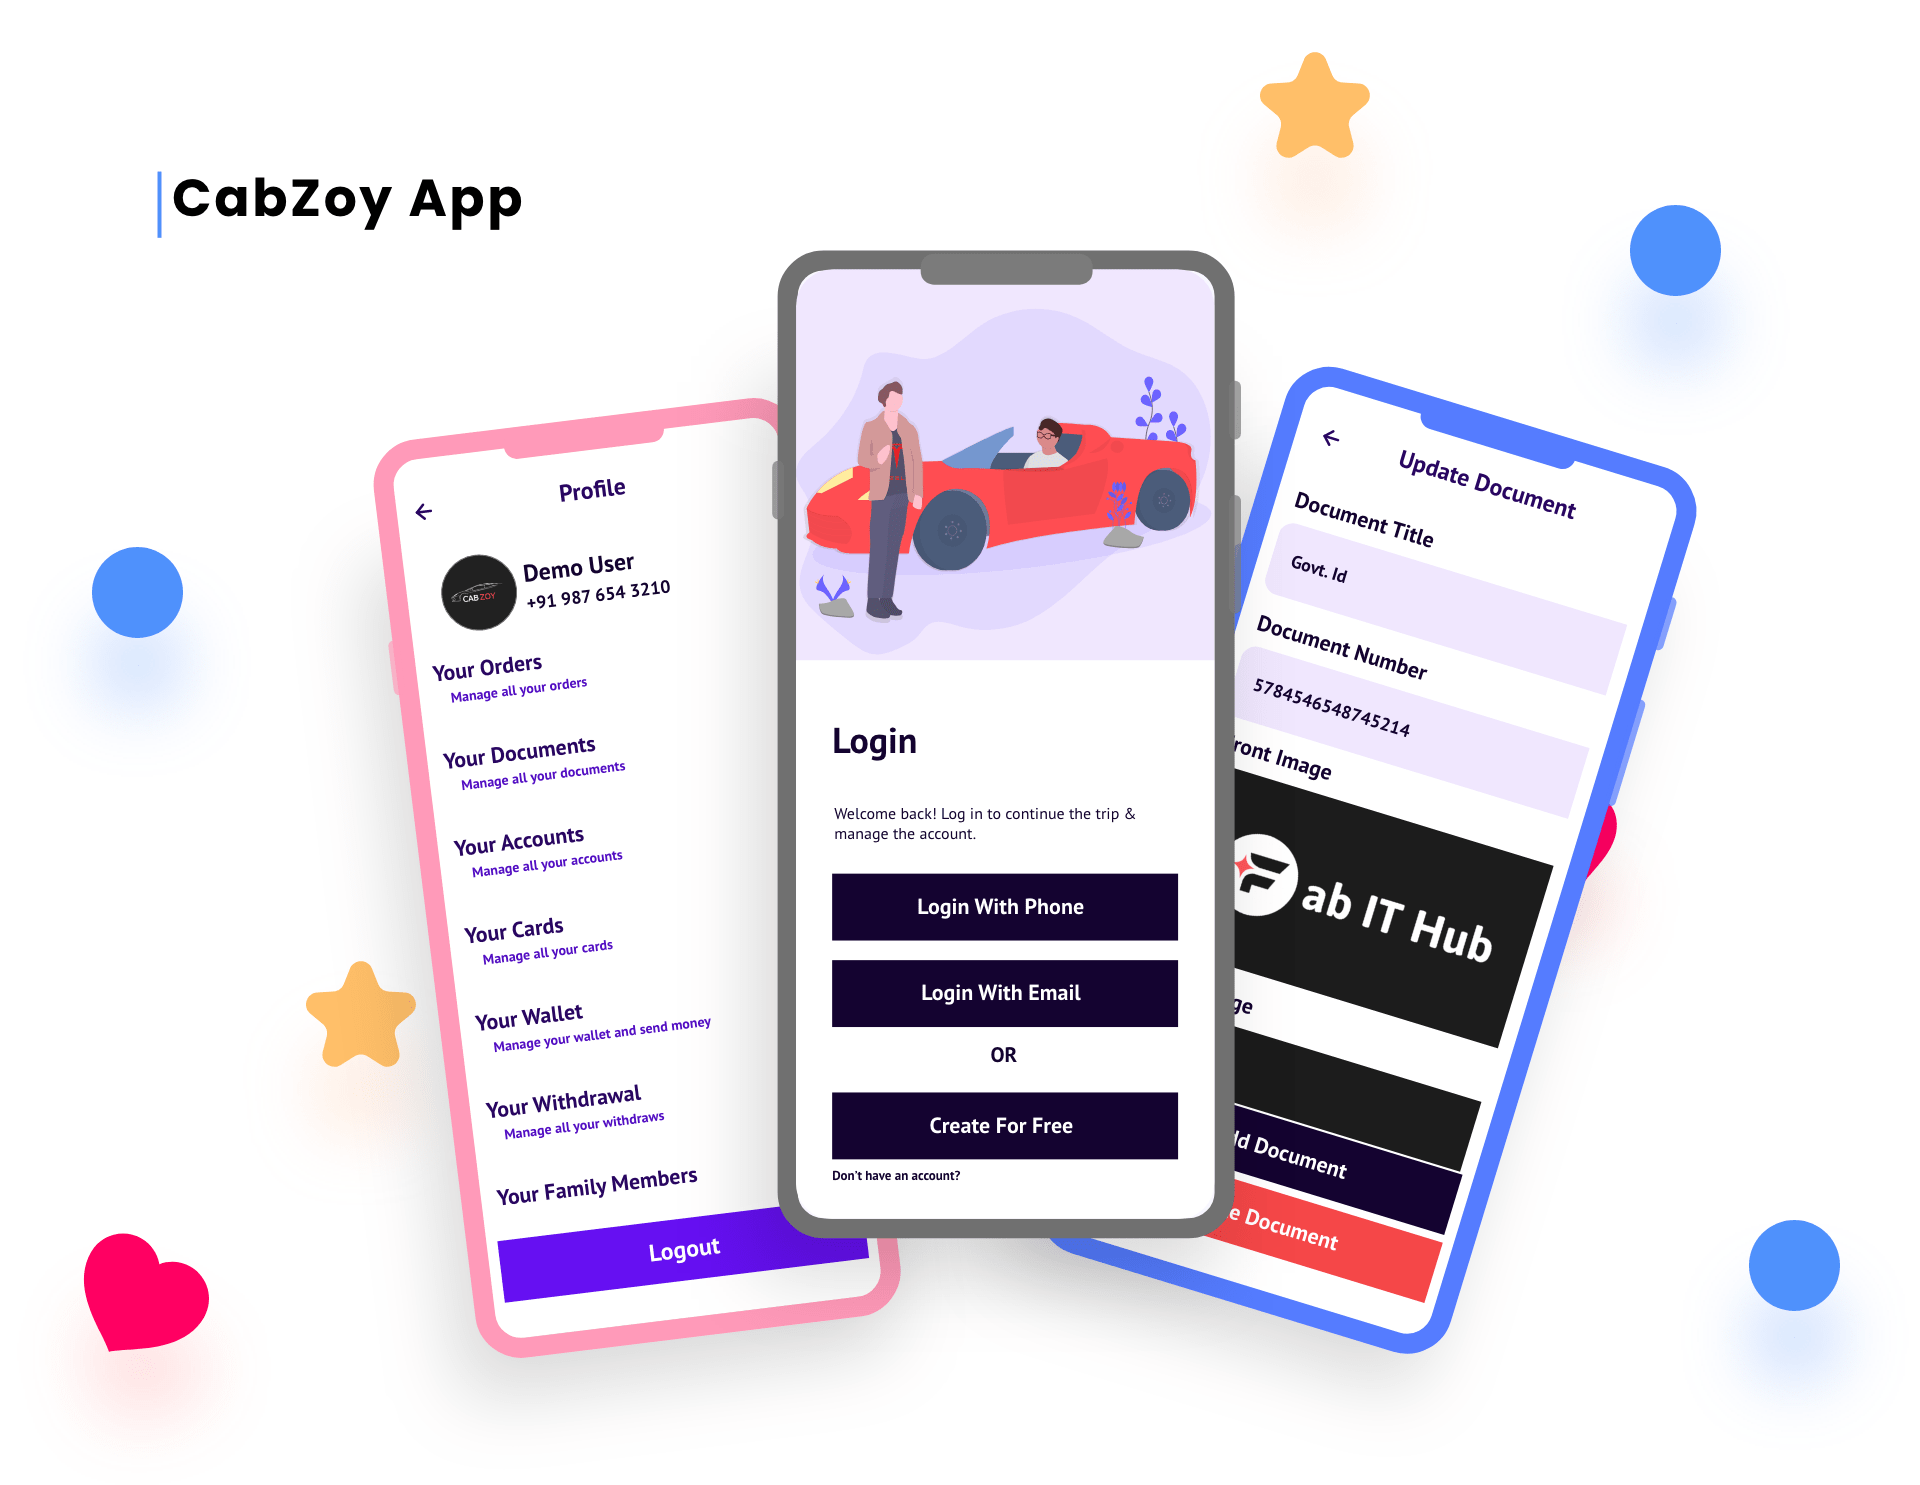 CabZoy Taxi - Complete Taxi Solution - 3